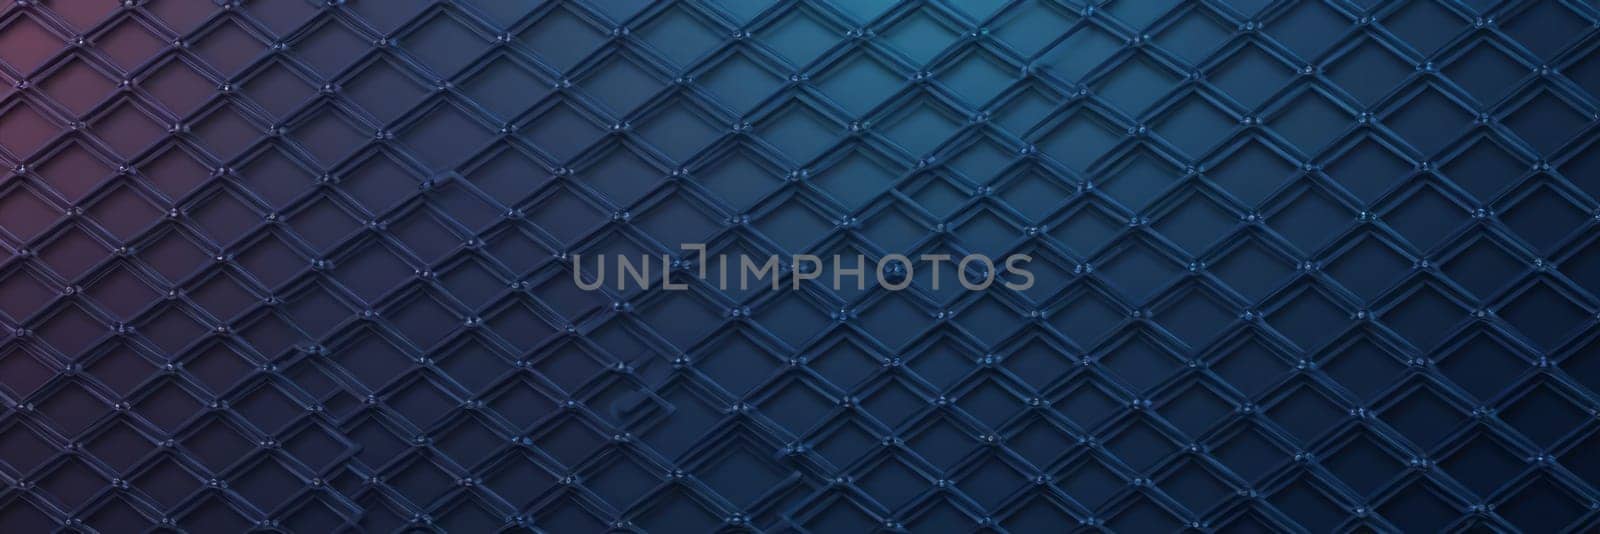 Lattice Shapes in Blue and Dark blue by nkotlyar